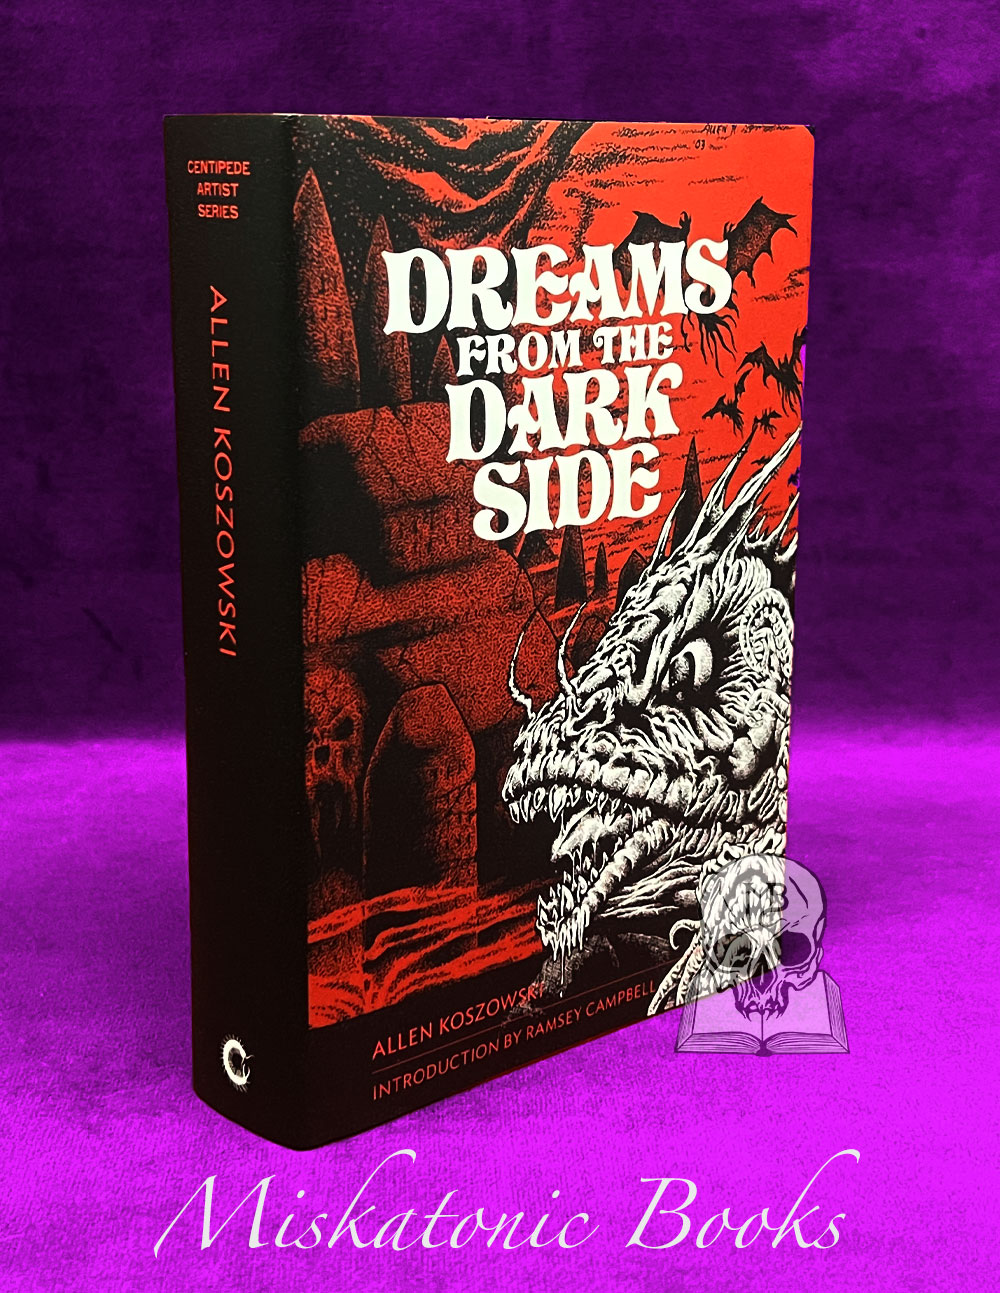 DREAMS FROM THE DARK SIDE by Allen Koszowski - SIGNED Limited Edition Hardcover